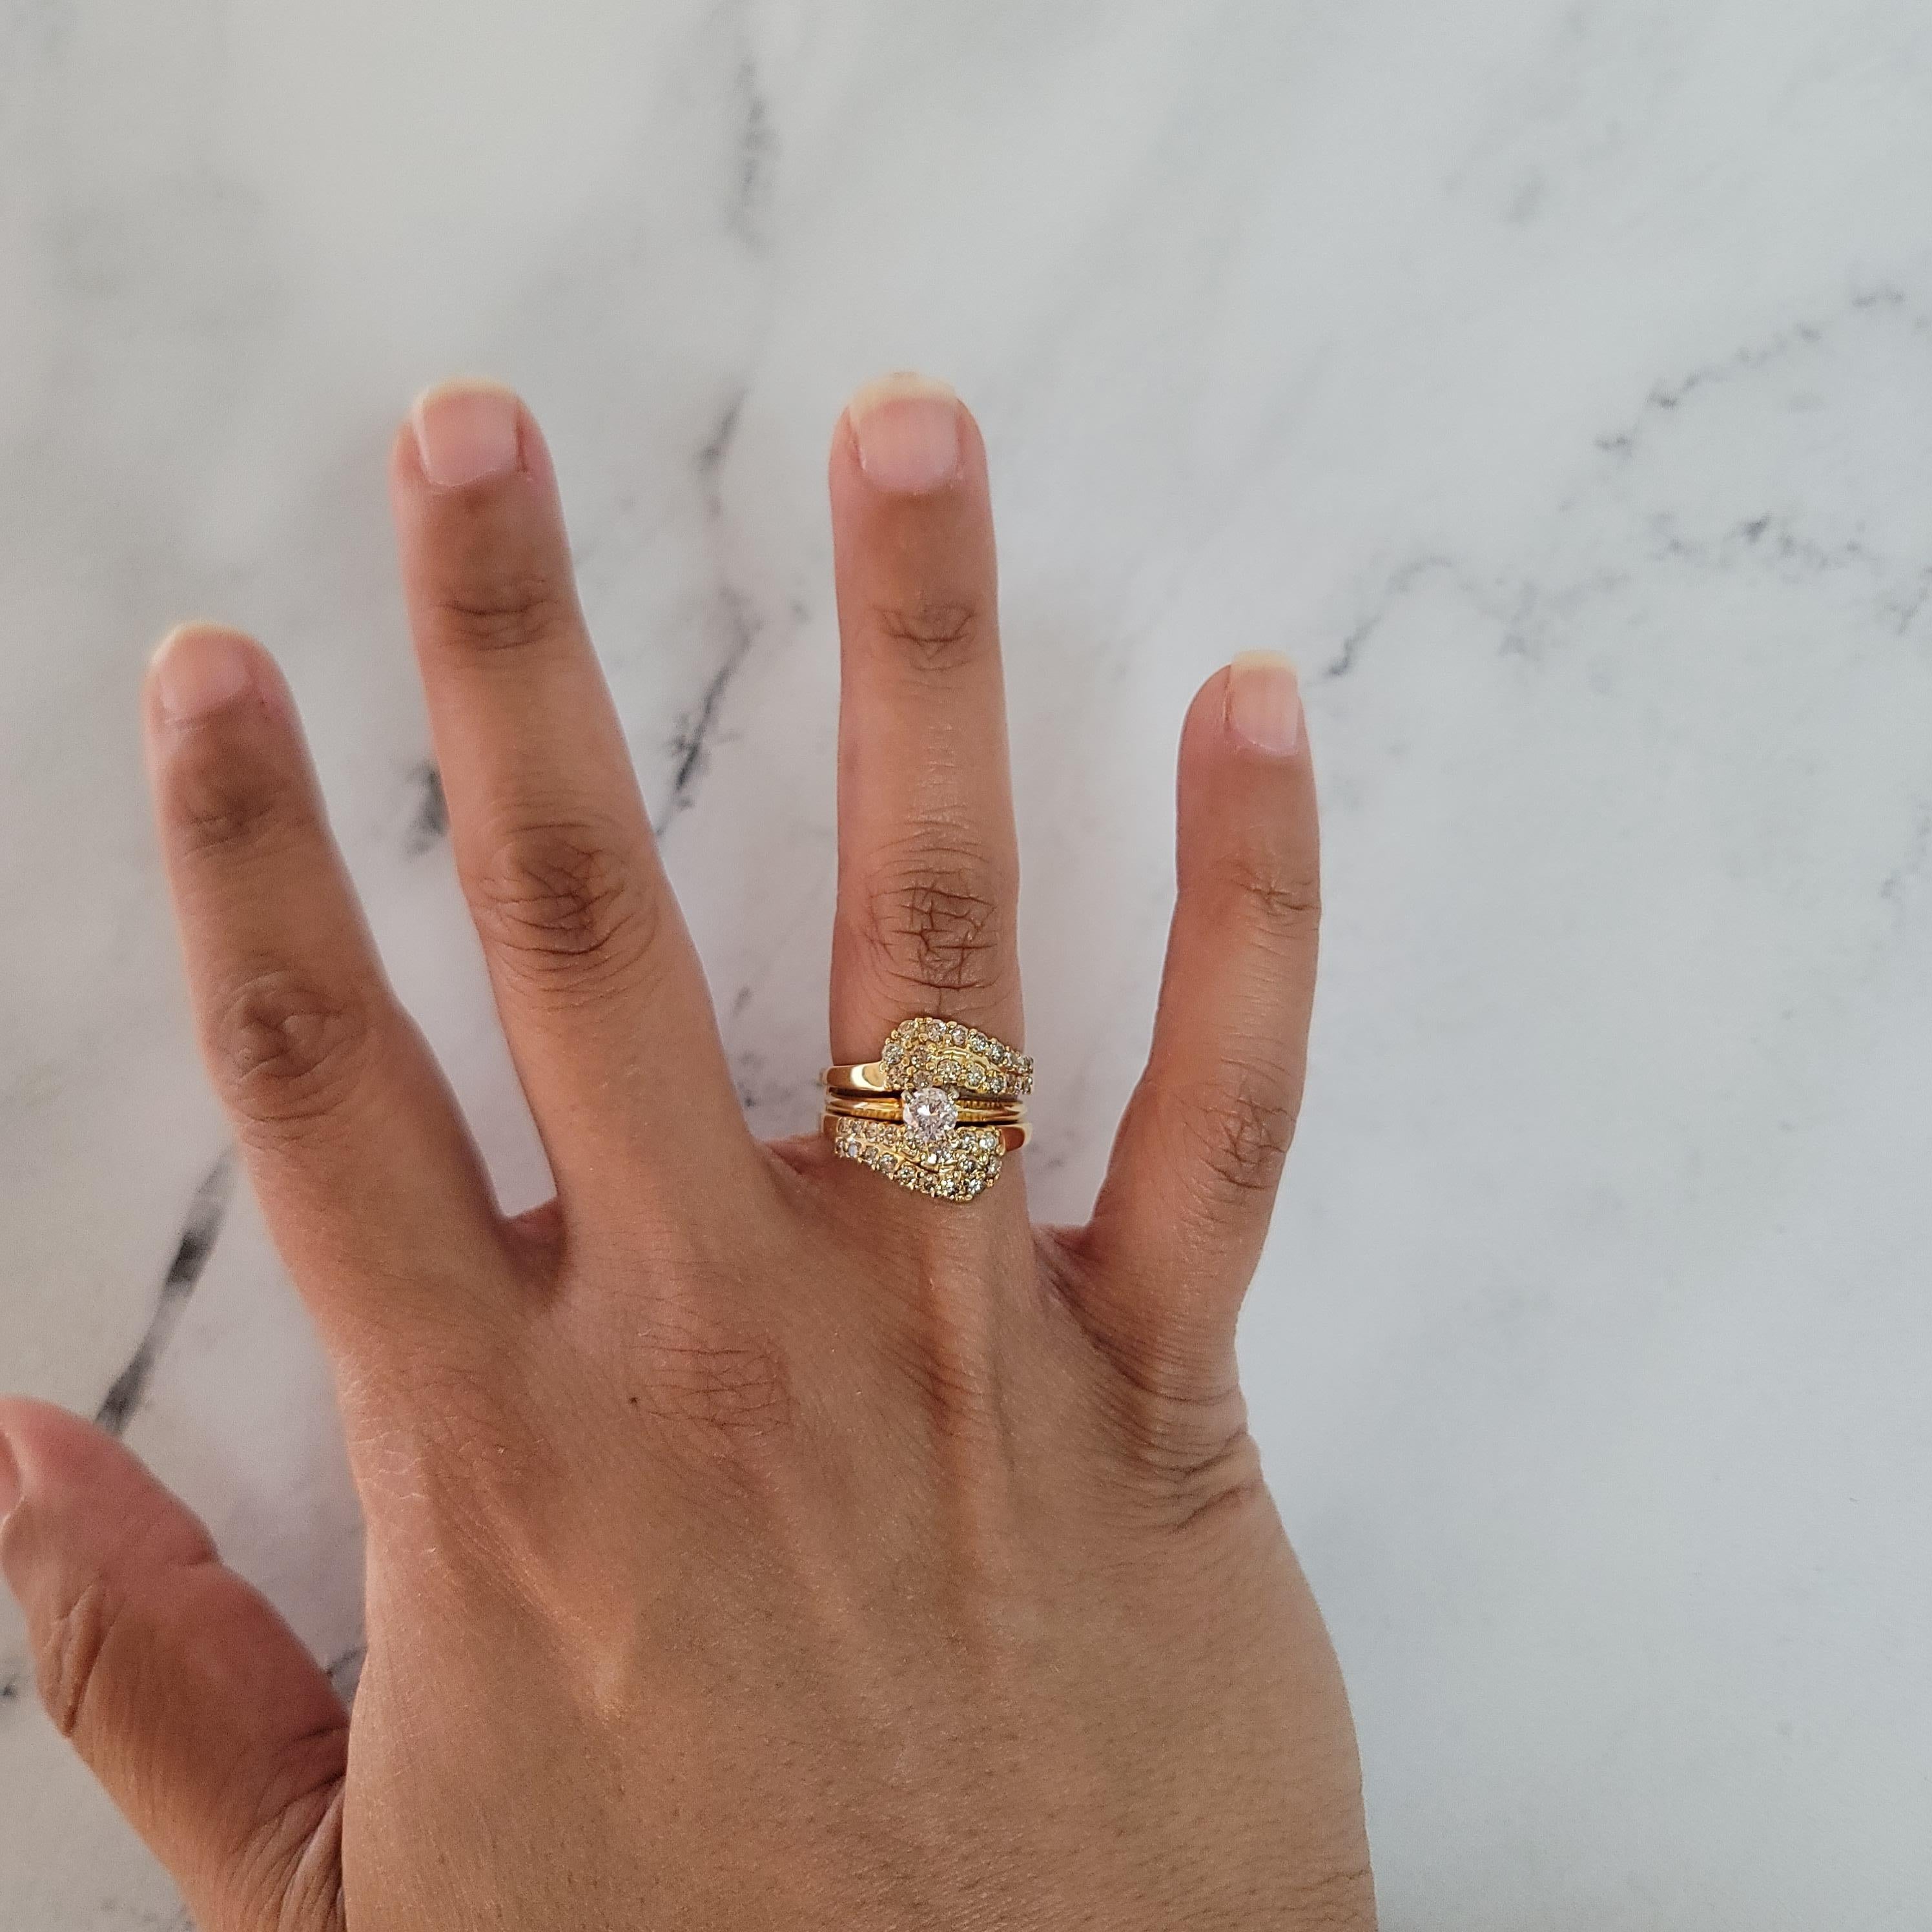 ♥ Ring Summary ♥

Main Stone: Diamond
Approx. Carat Weight: .95cttw
Diamond Clarity: VS2/SI1
Diamond Color: I/J
Stone Cut: Round
Band Material: 14k Yellow Gold
Gap Measurement: 4mm
Dimension Height: 17mm
**Ring Guard Only 